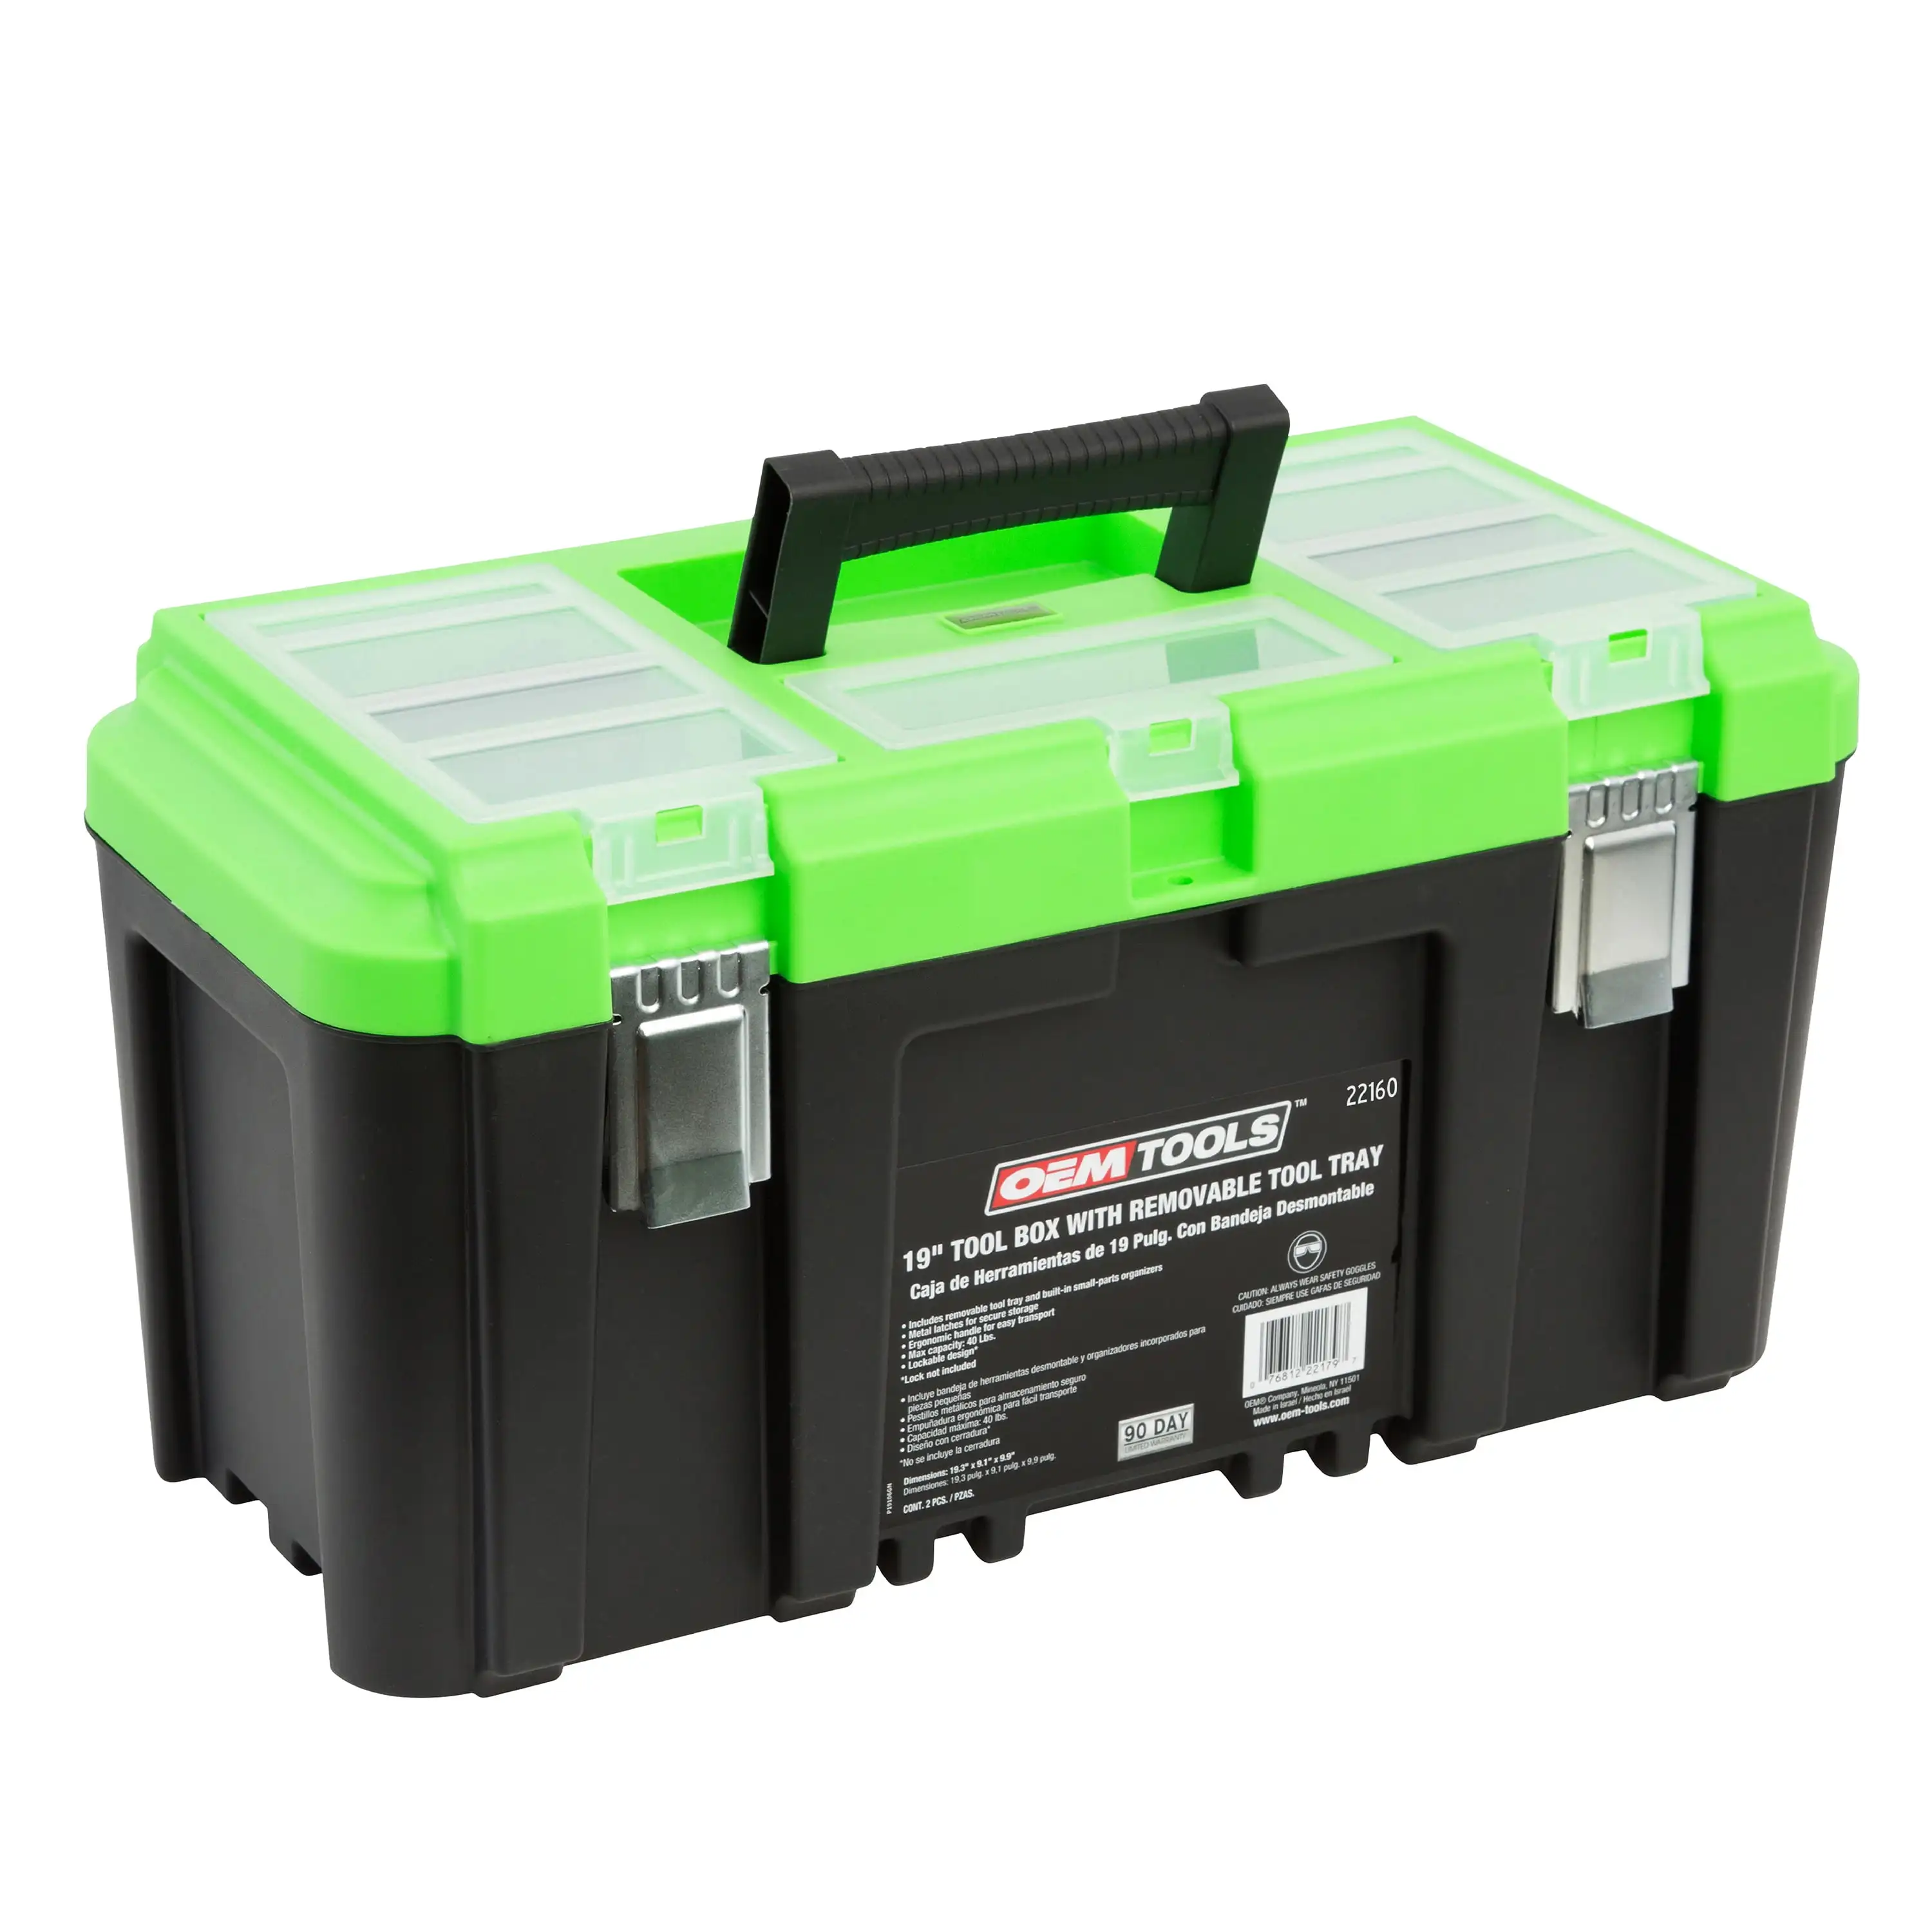 

19" Tool Box with Removable Tool Tray, Security Slot for Padlocks, Tool Box Multiple Compartments Lid, Max. Weight 40 Lb.